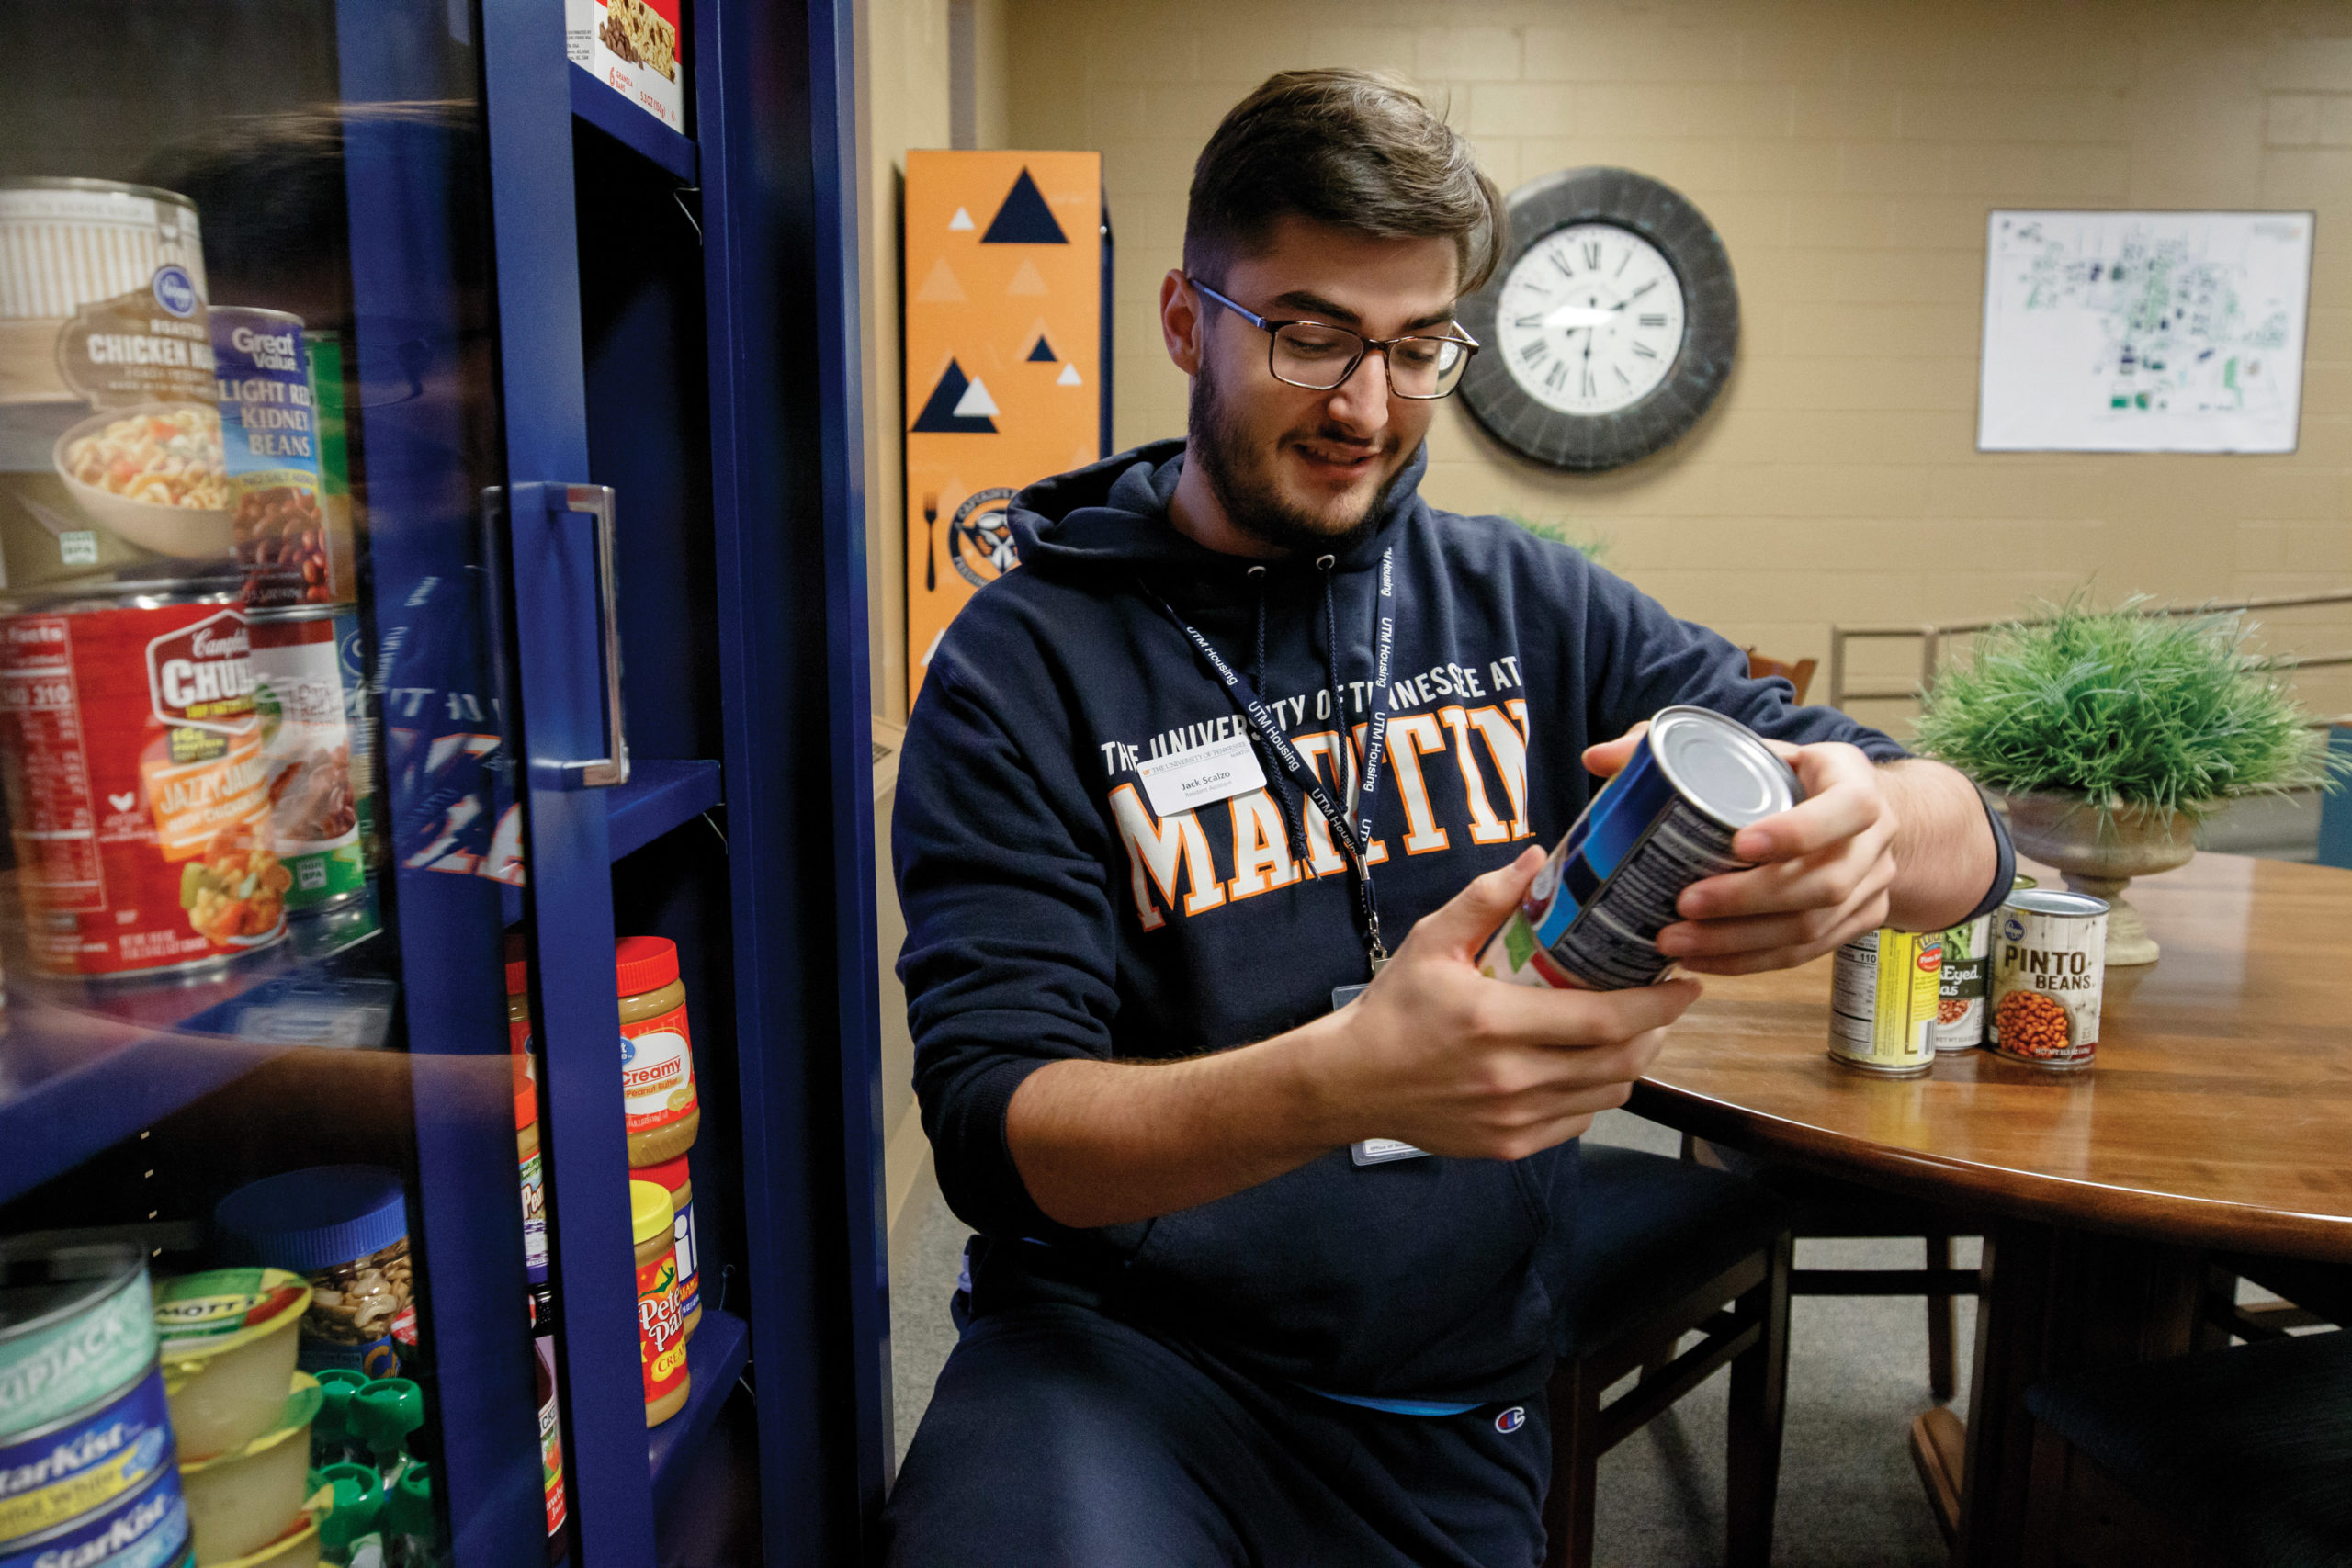 A UT Martin student volunteer sorts canned goods in the food pantry